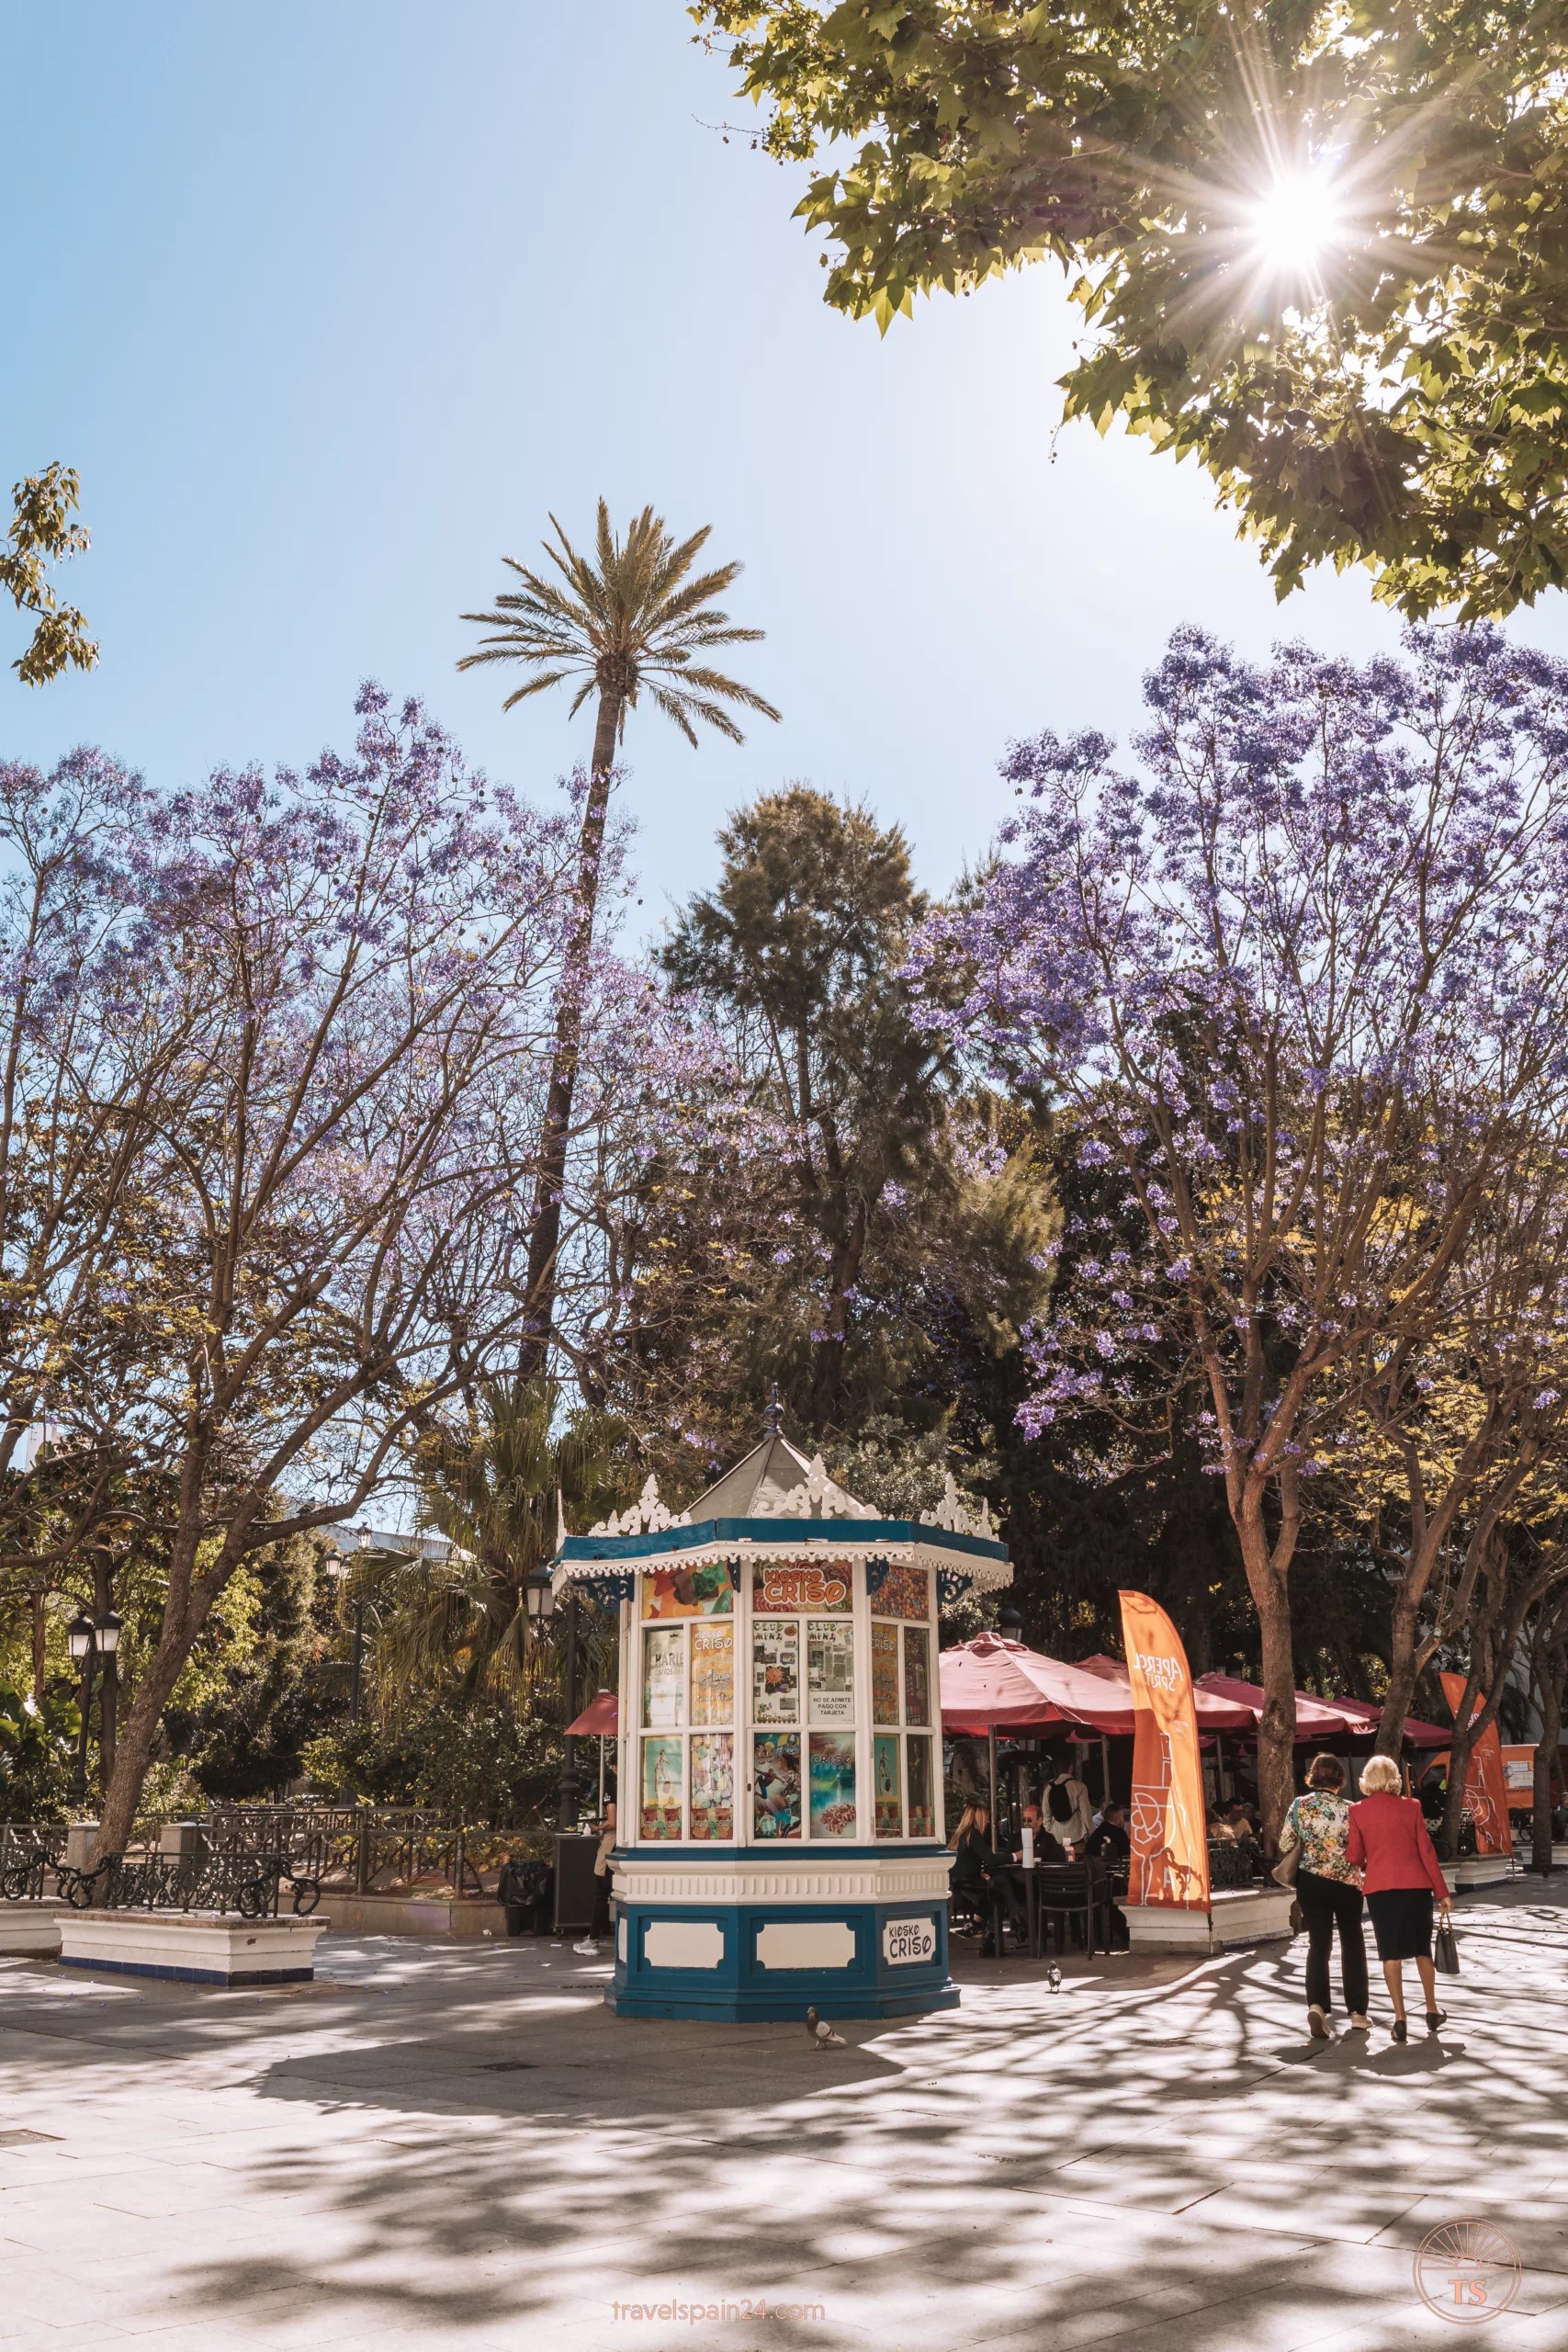 Plaza de Mina in Cadiz with beautiful jacaranda trees in full bloom. This picturesque scene is one of the Cadiz highlights, showcasing the natural beauty and serene atmosphere of the plaza.
